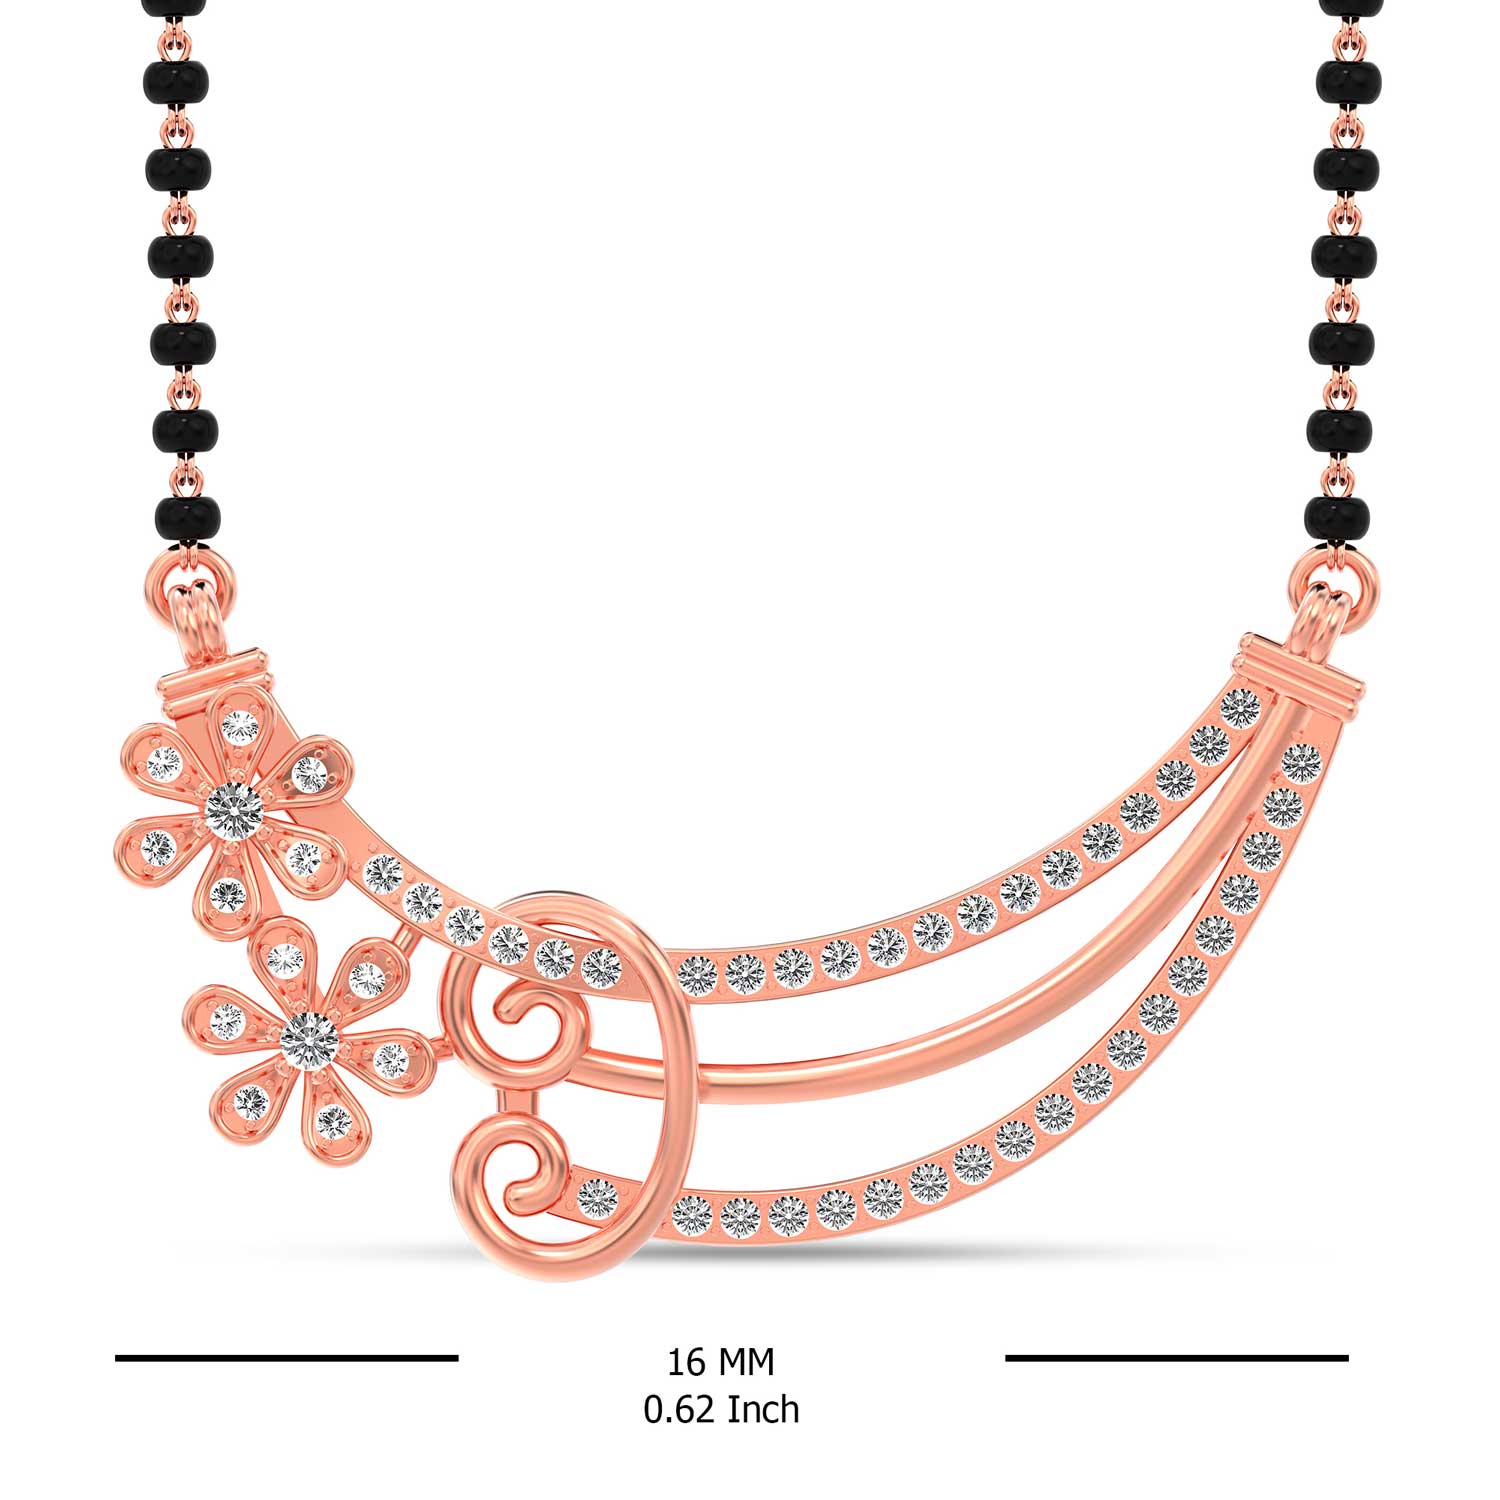 925 Sterling Silver 14K Rose Gold Plated Cubic Zirconia Flower Binding Love Studded Mangalsutra for Women